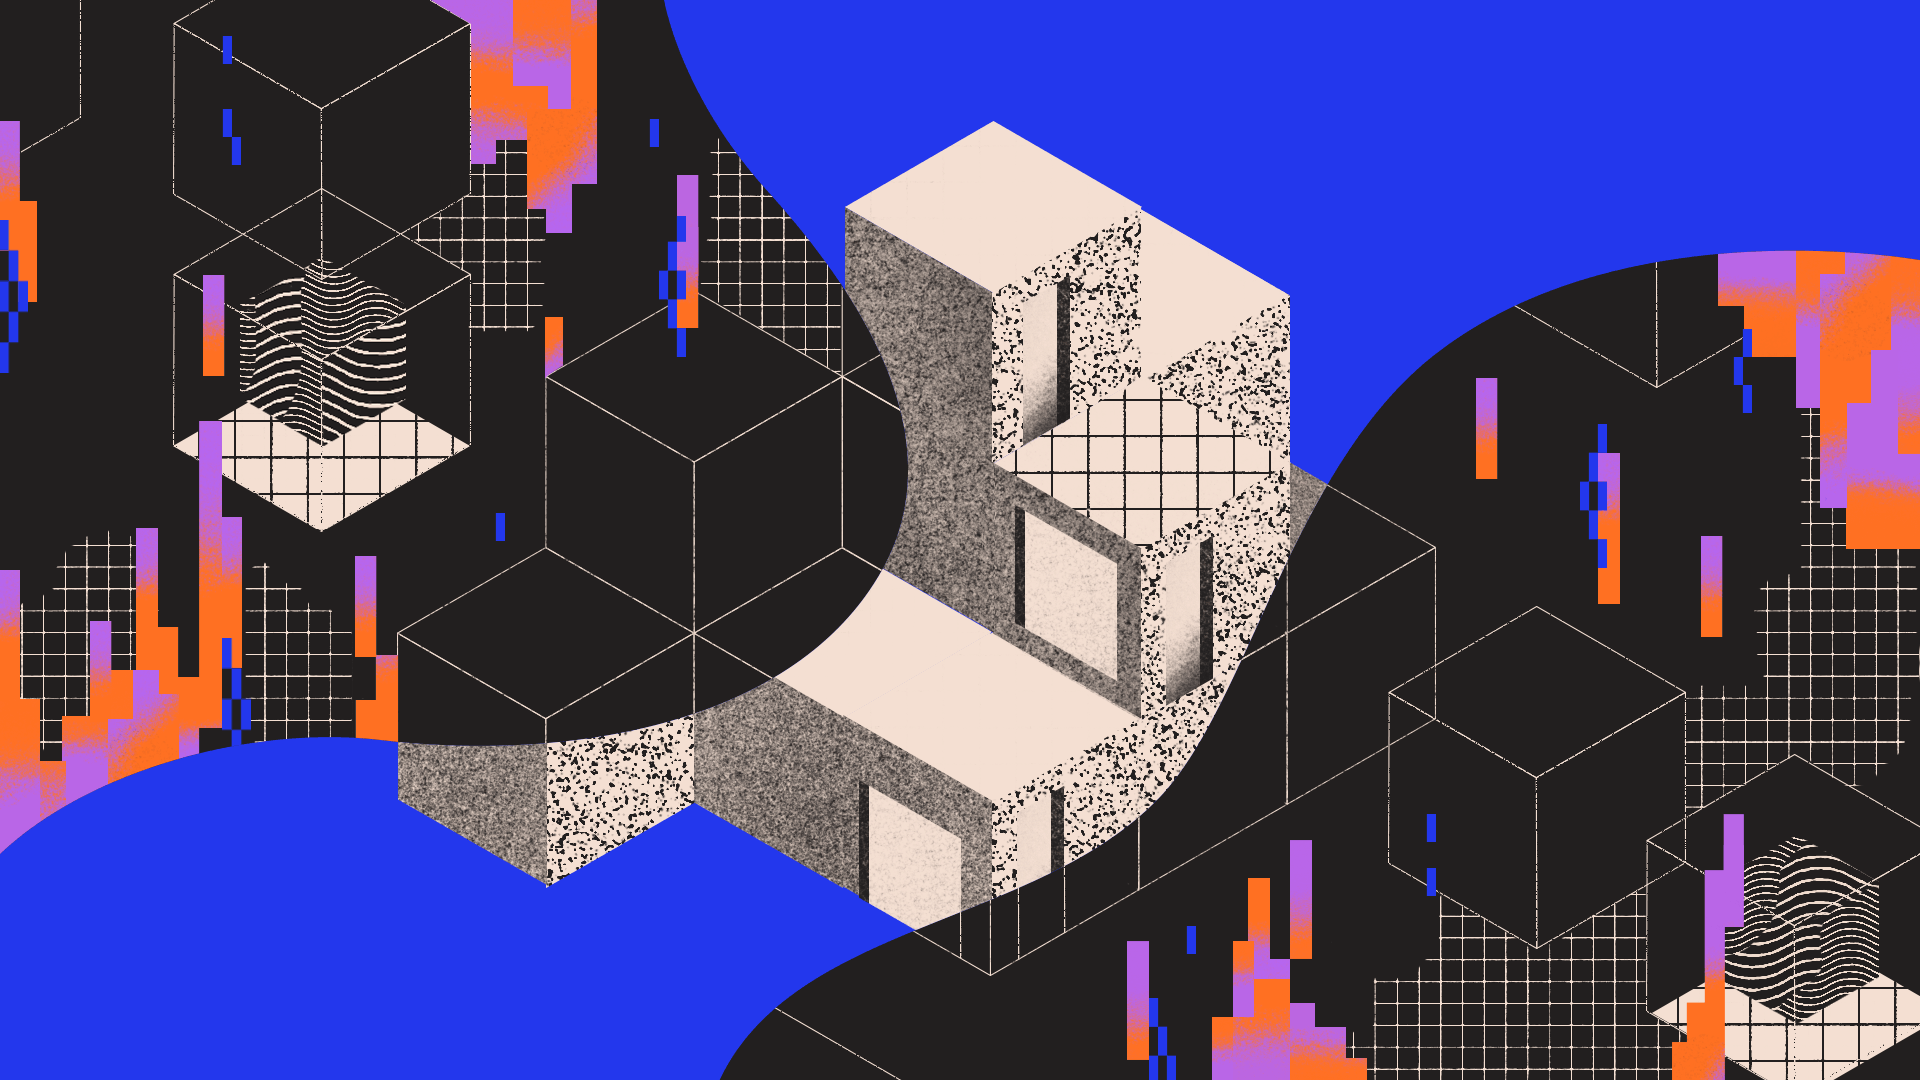 Abstract illustration of a building on the blockchain